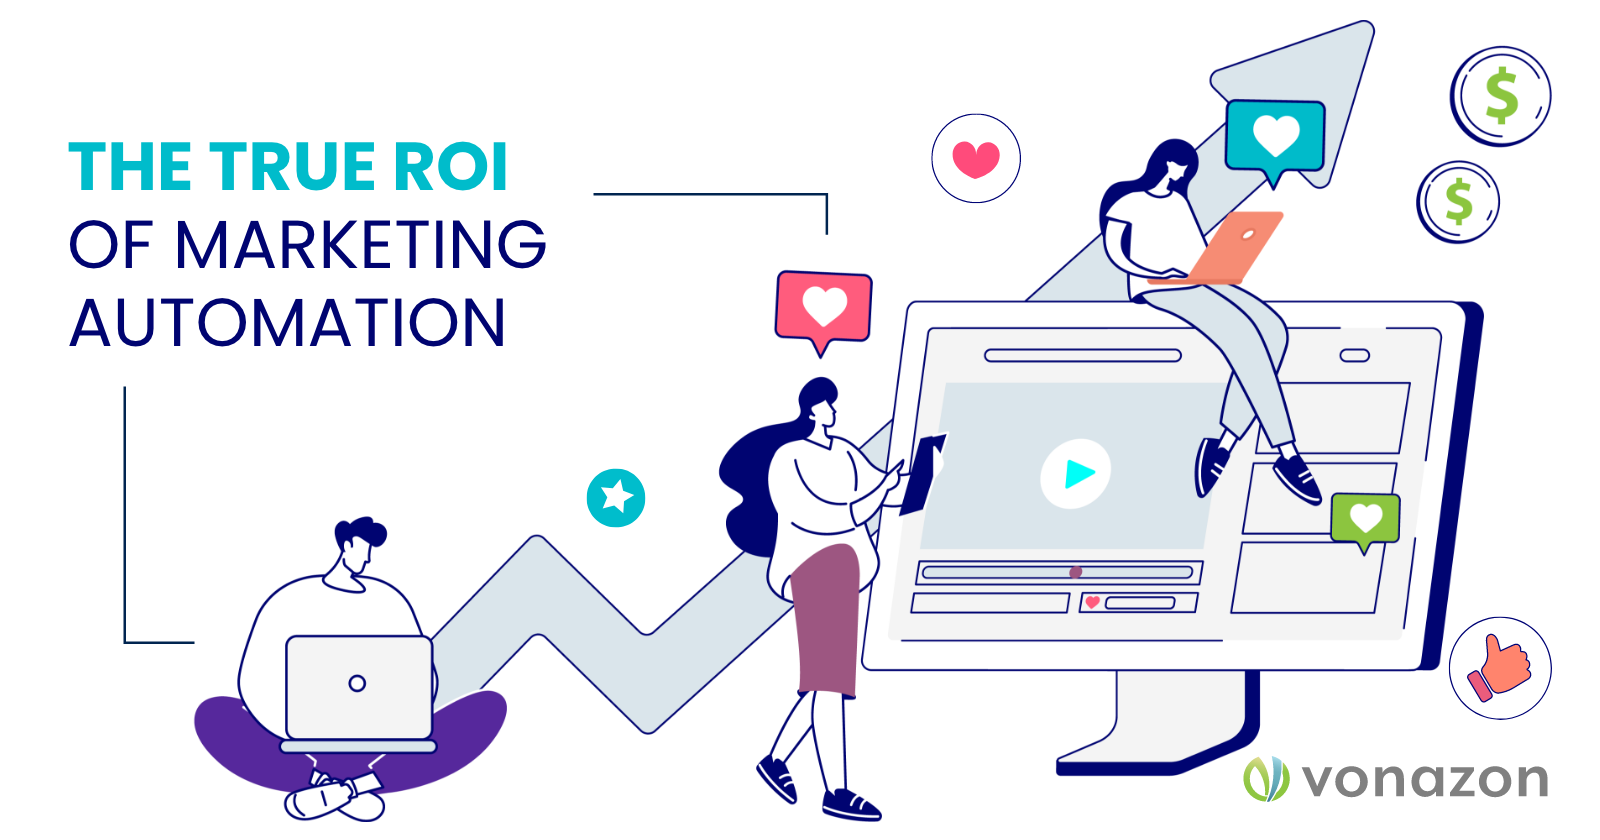 The True ROI of Marketing Automation